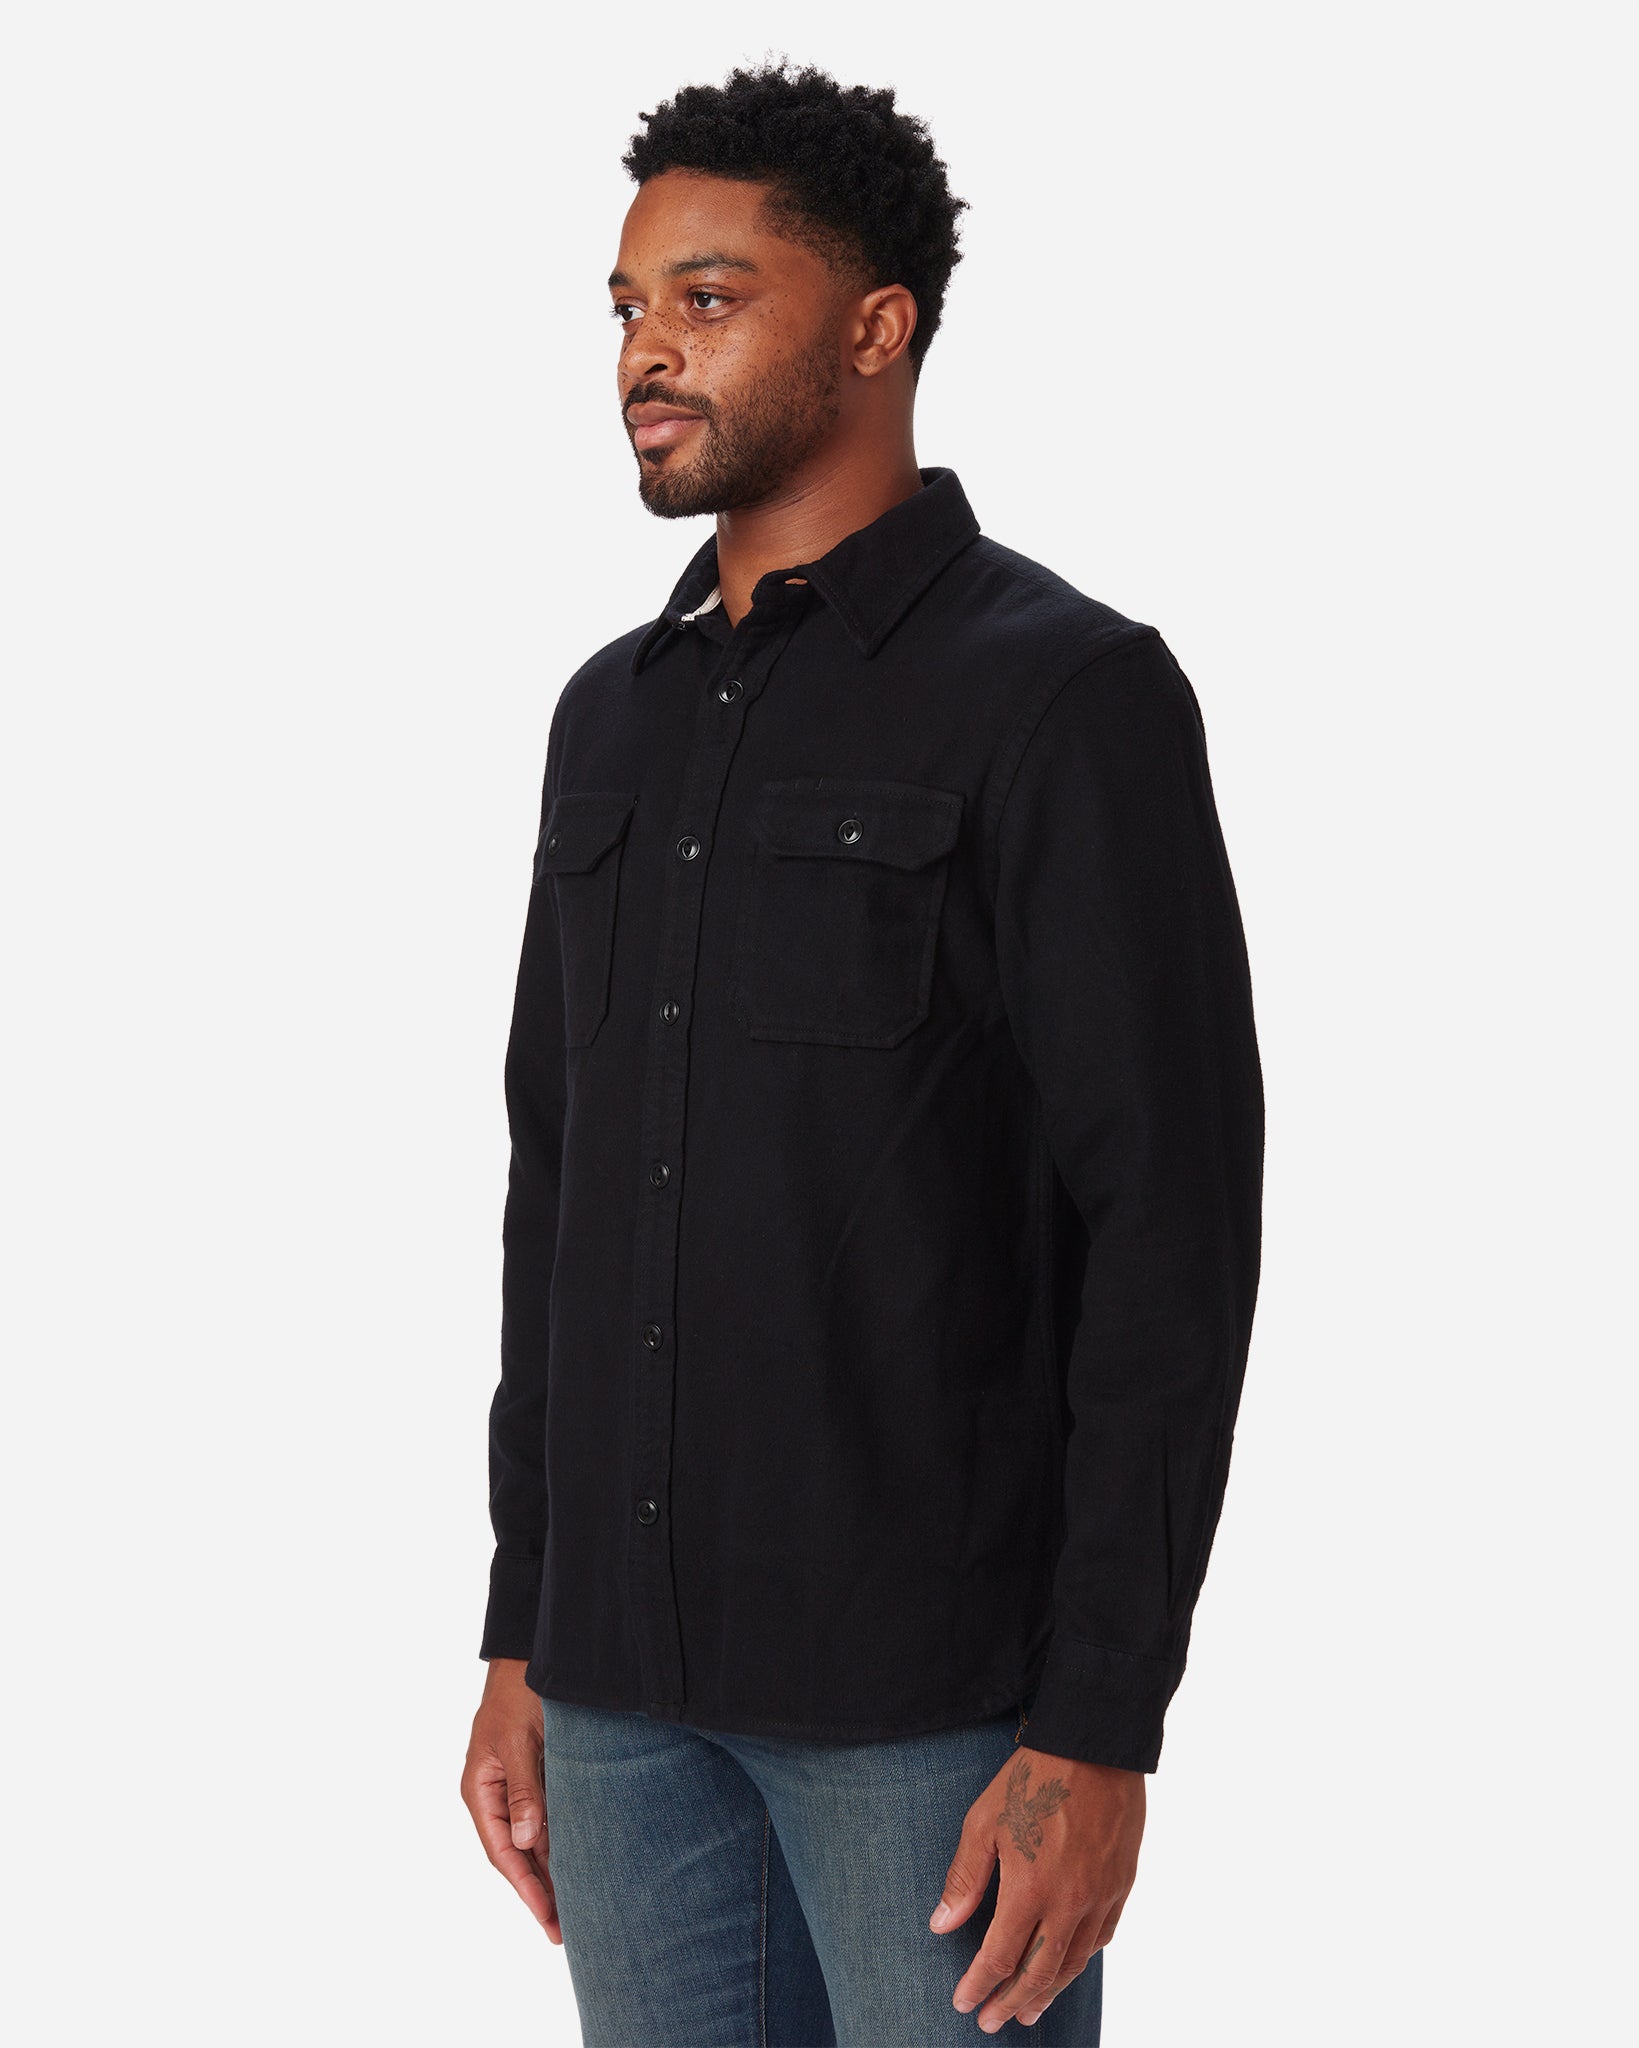 front of model wearing Ace Rivington men's black soft brushed flannel shirt with color matched buttons and breast pockets and dirty vintage blue denim jeans with slight stylistic thigh wear with a rightward gaze